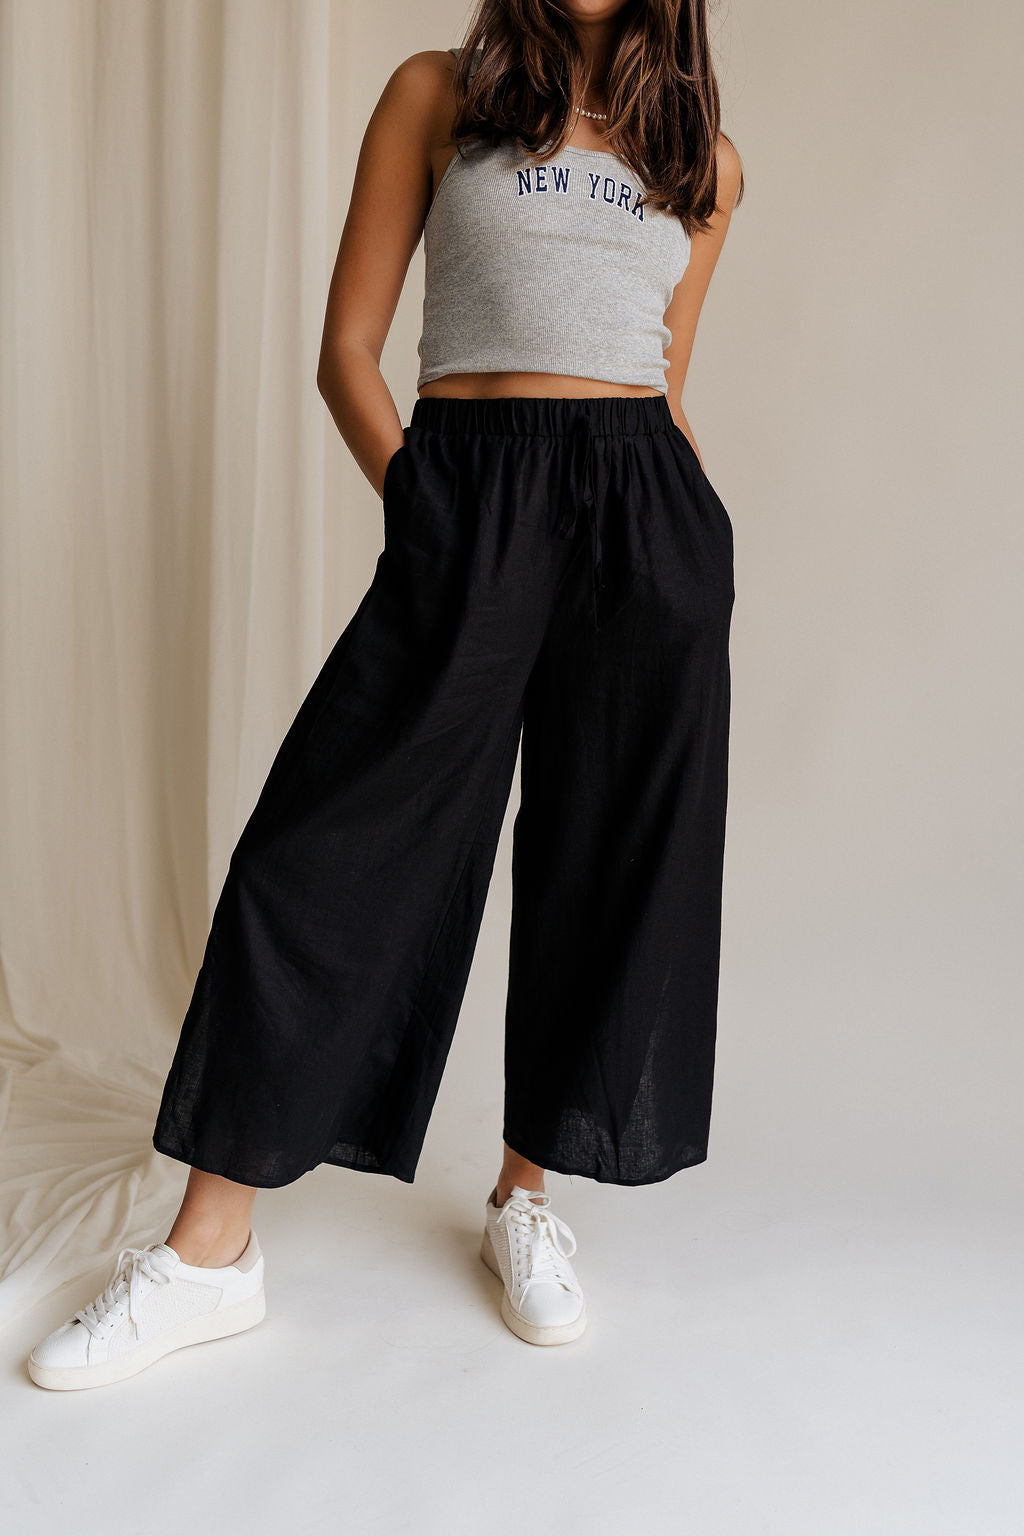 Lower body front view of female model wearing the Meredith Black Cropped Wide Leg Pants that have black fabric, cropped wide legs, side slits, and a drawstring waist.